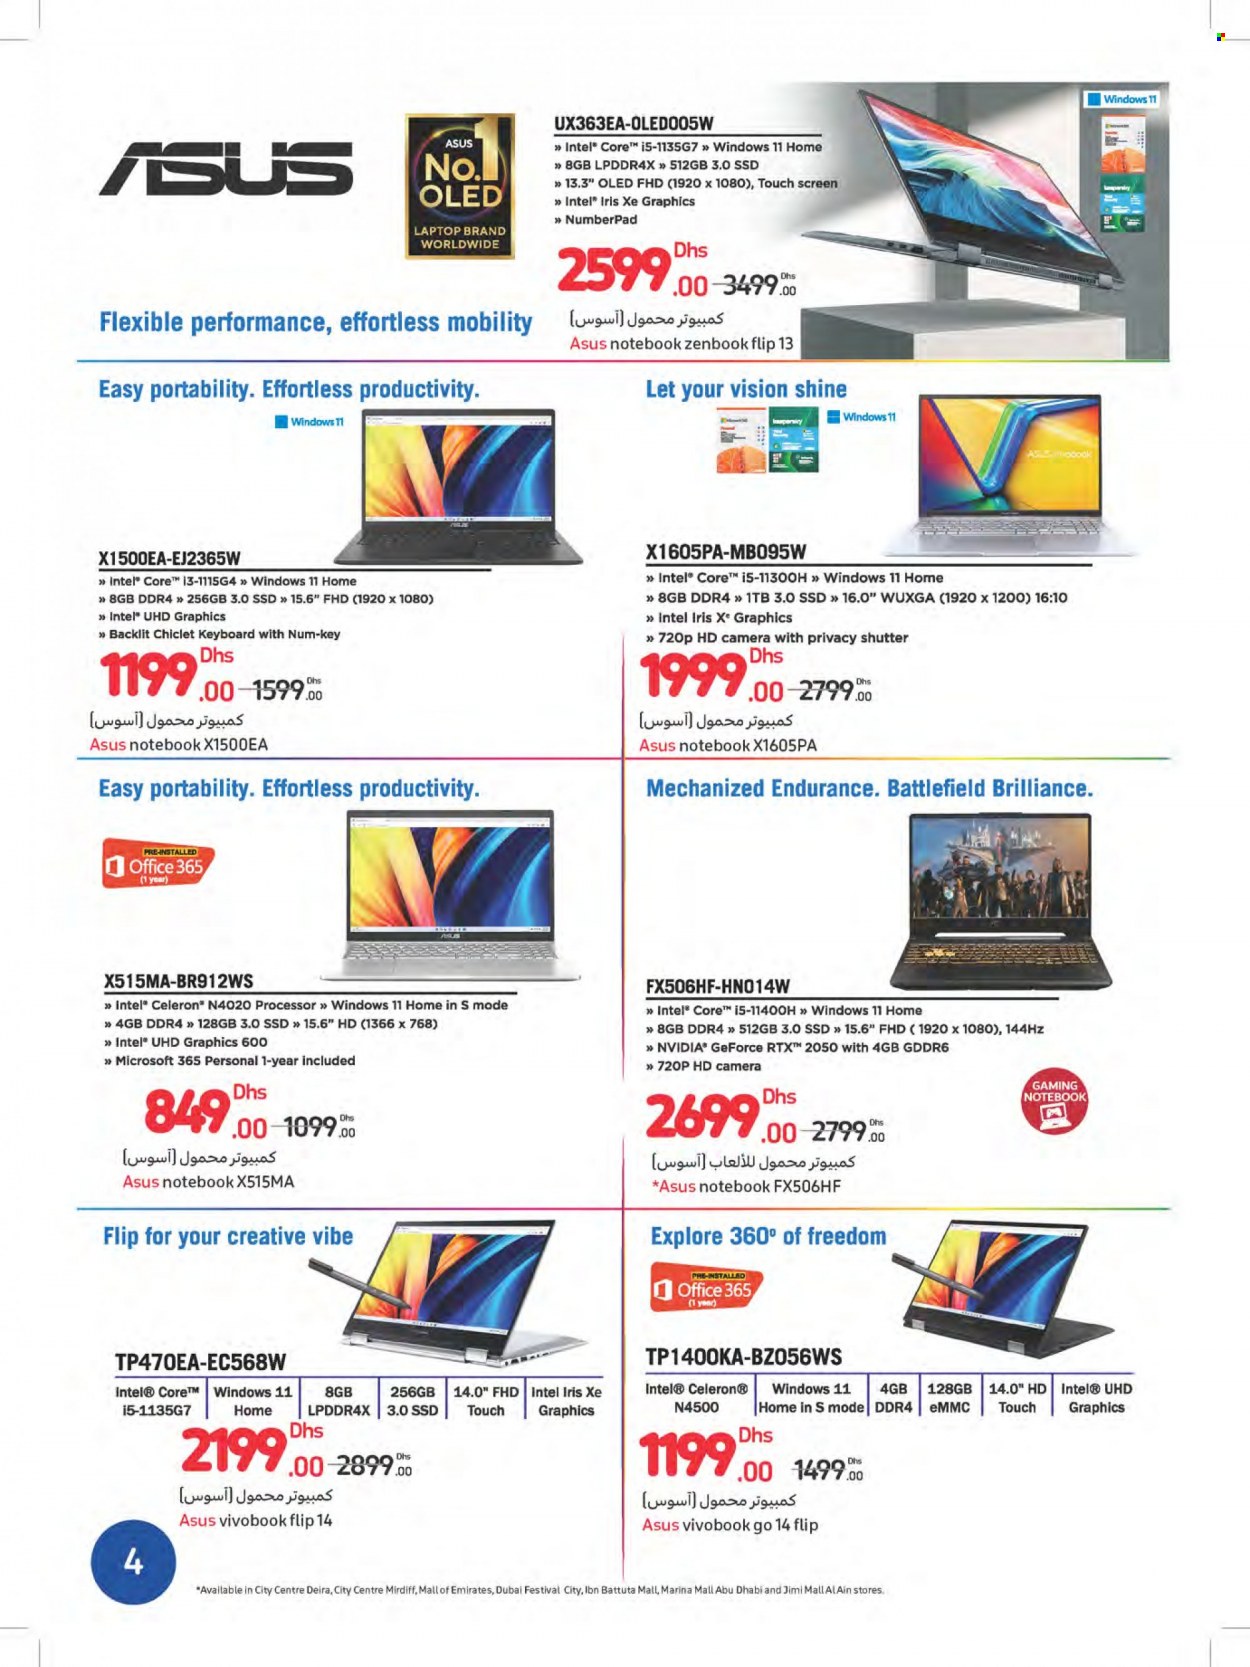 Carrefour offer - 28/03/2023 - 08/04/2023.